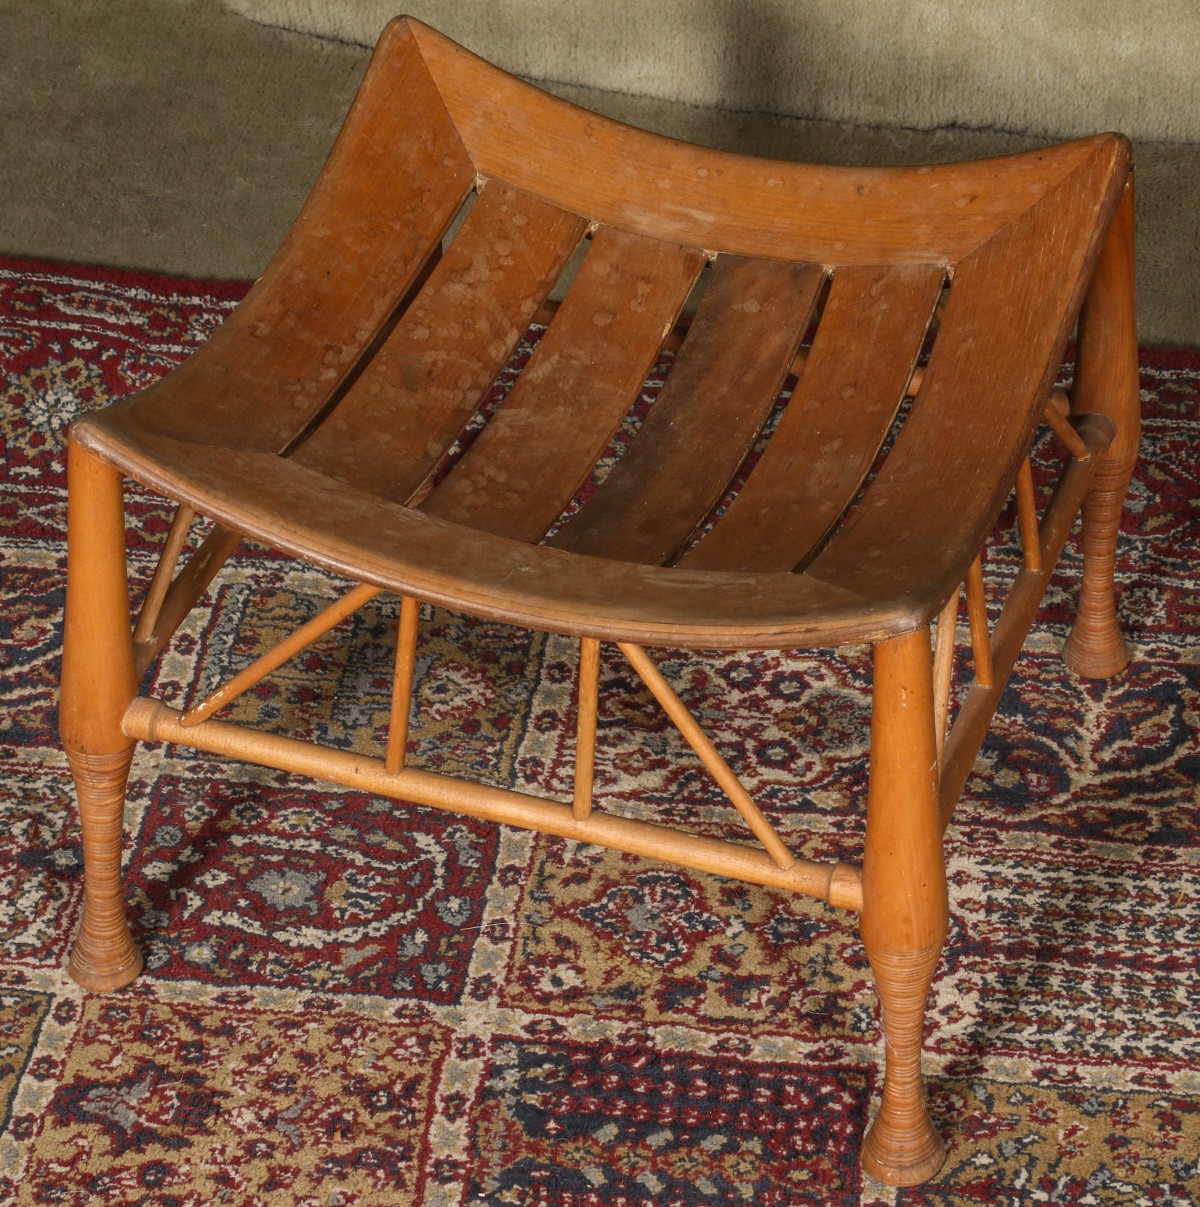 AN EGYPTIAN REVIVAL THEBES STOOL